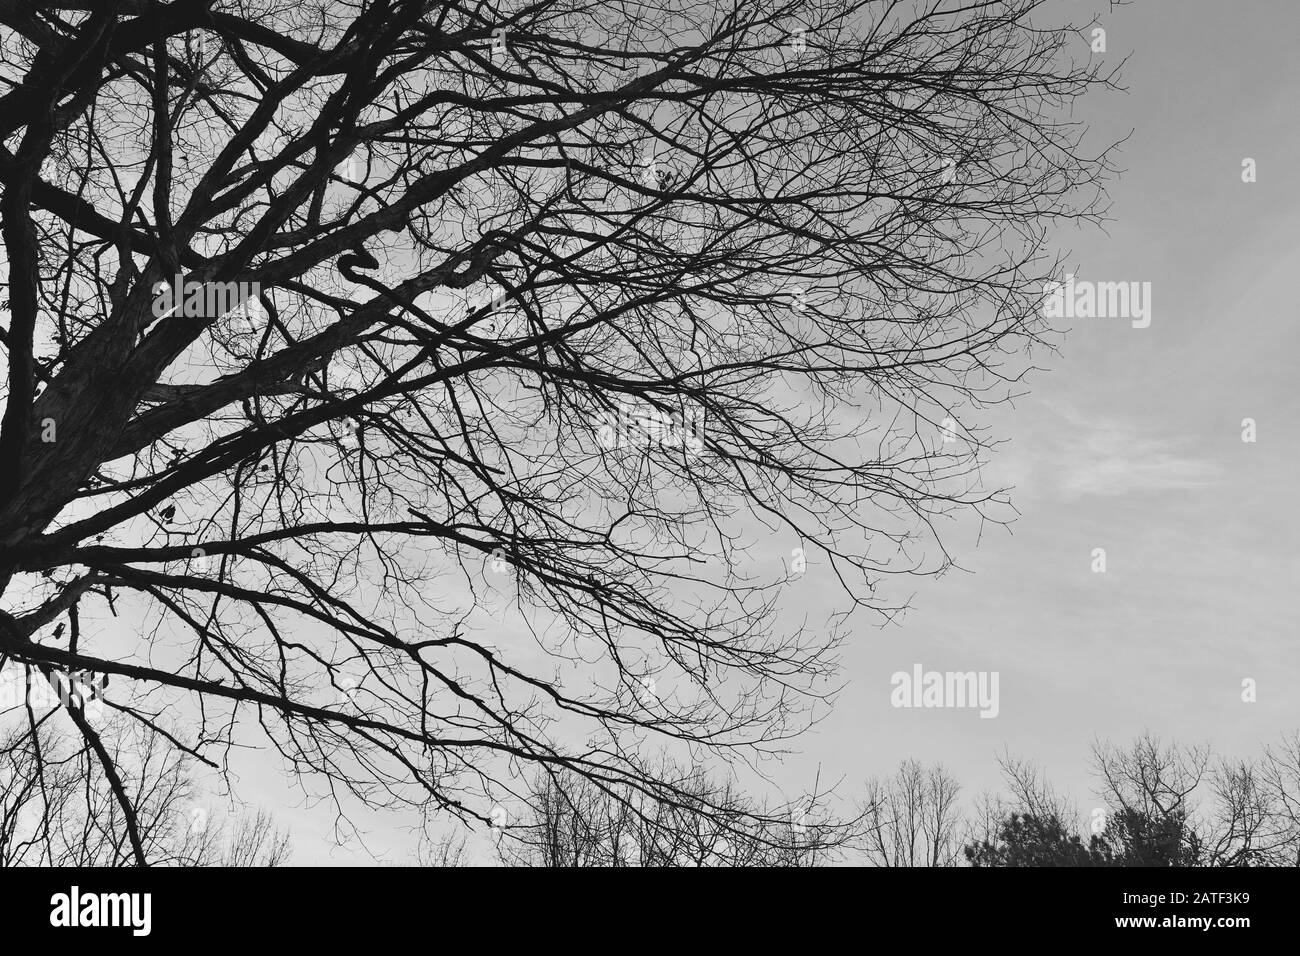 Spindly branches reach into the dark sky. Stock Photo